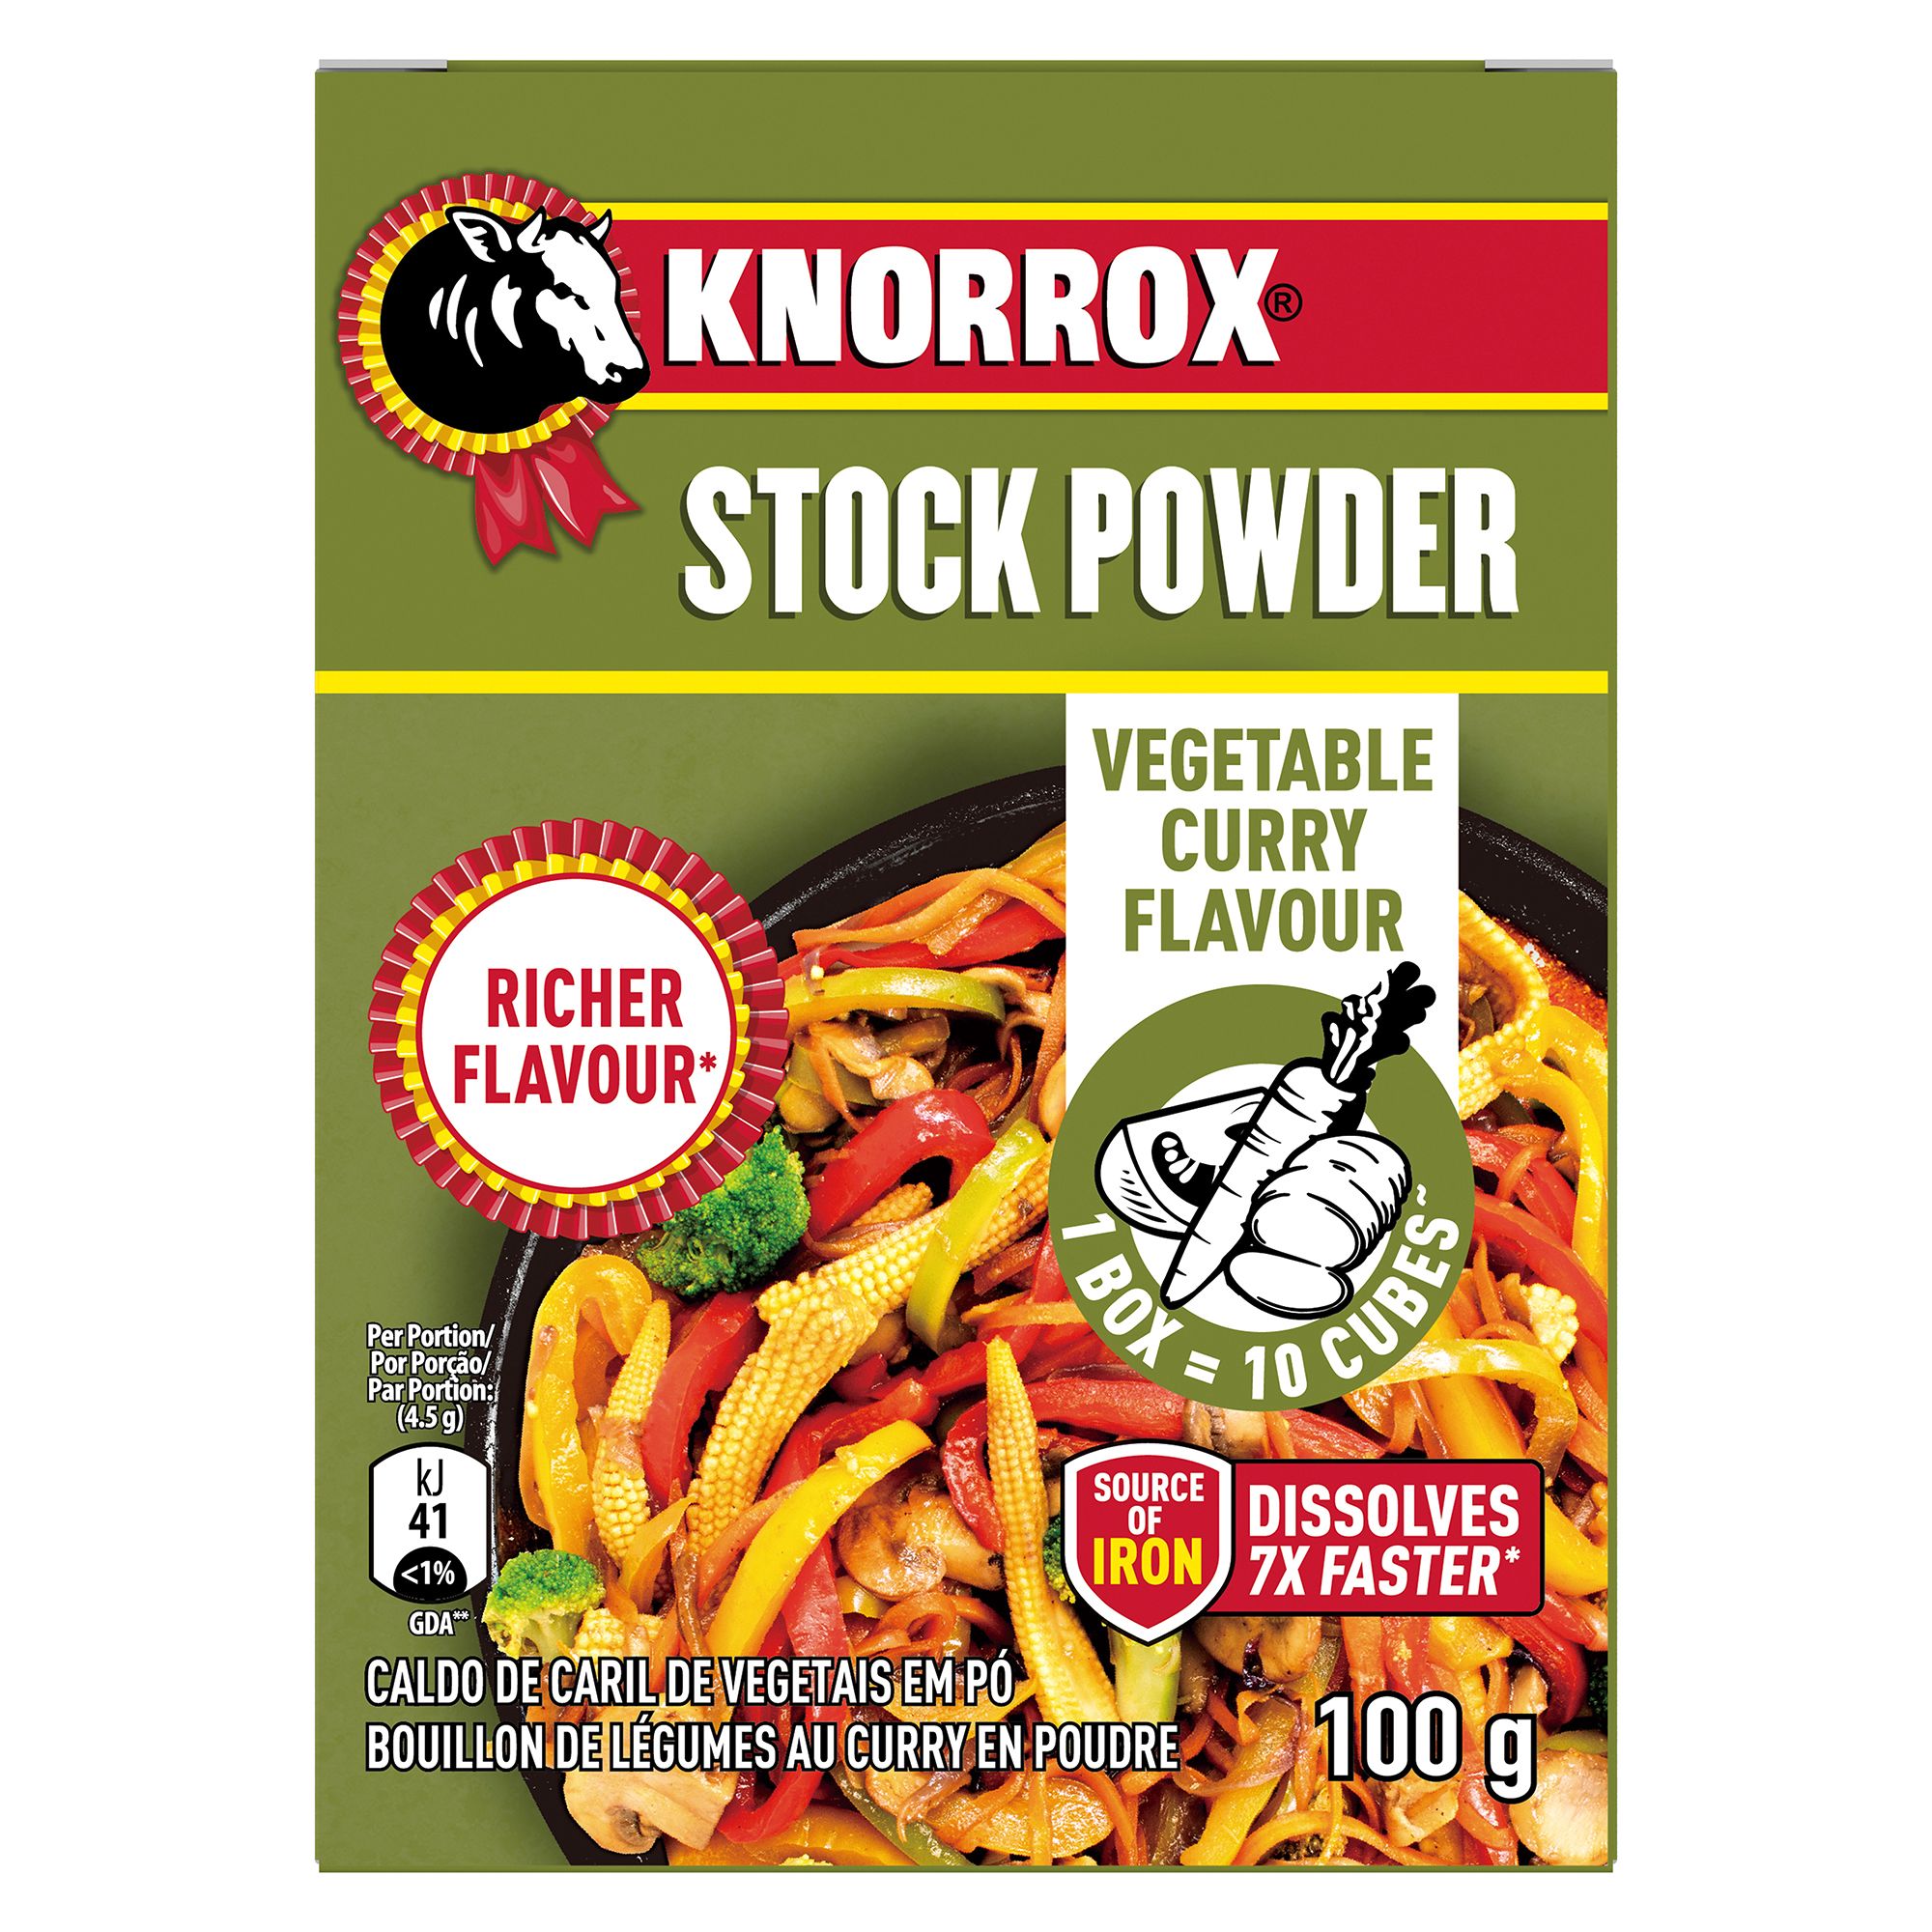 Knorrox Vegetable Curry Flavoured Stock Powder 100g